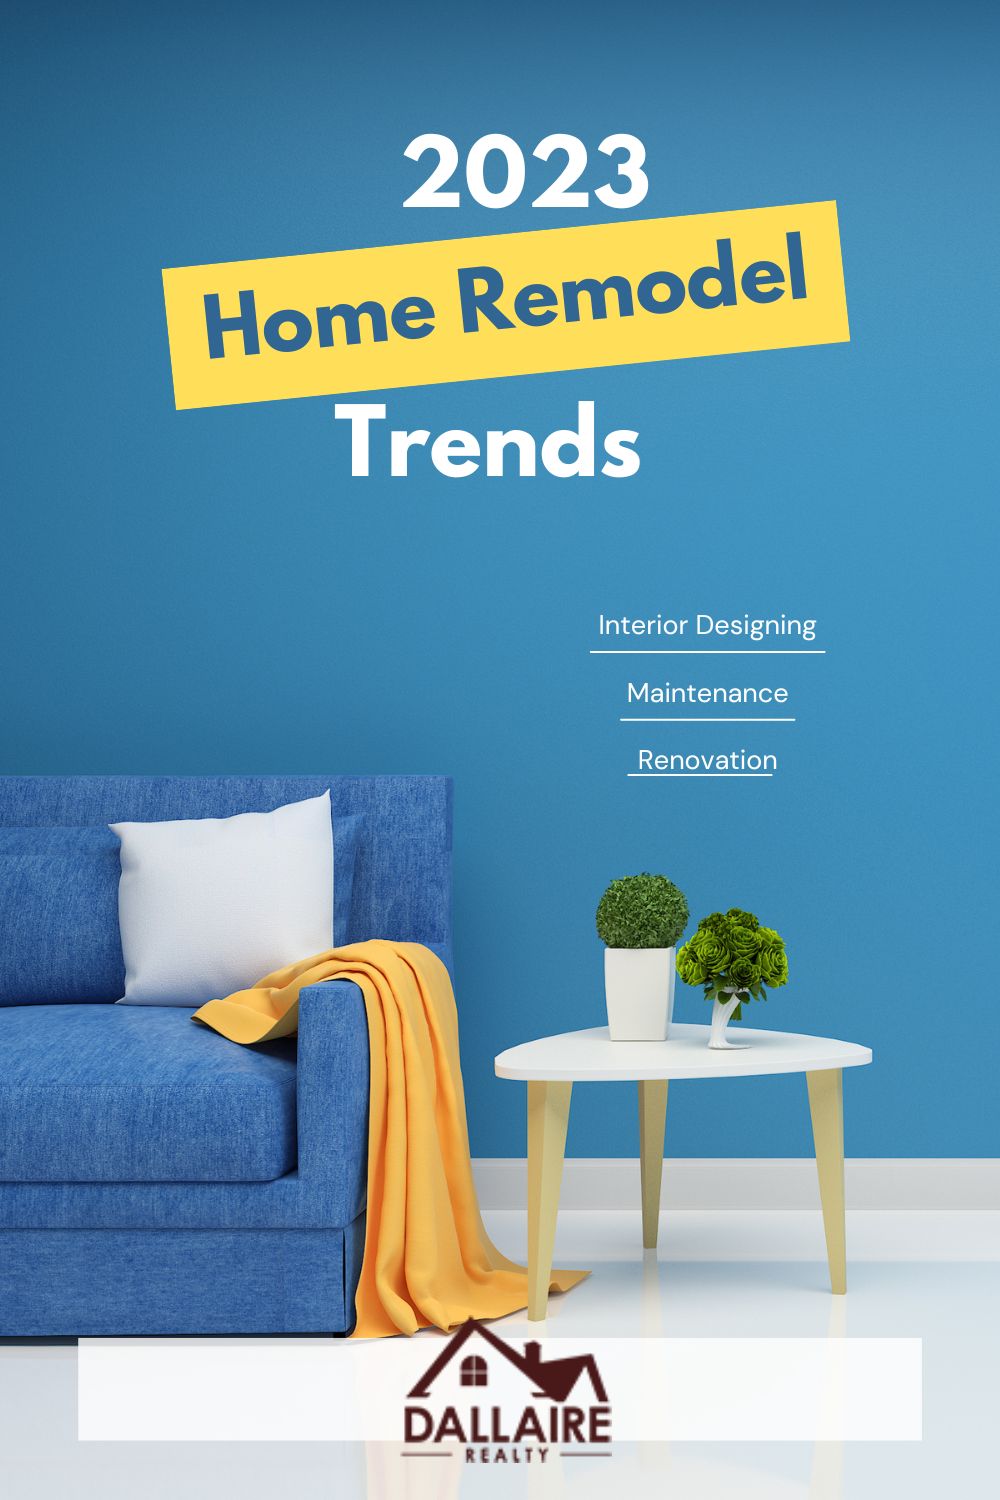 2023 Home Remodel Trends